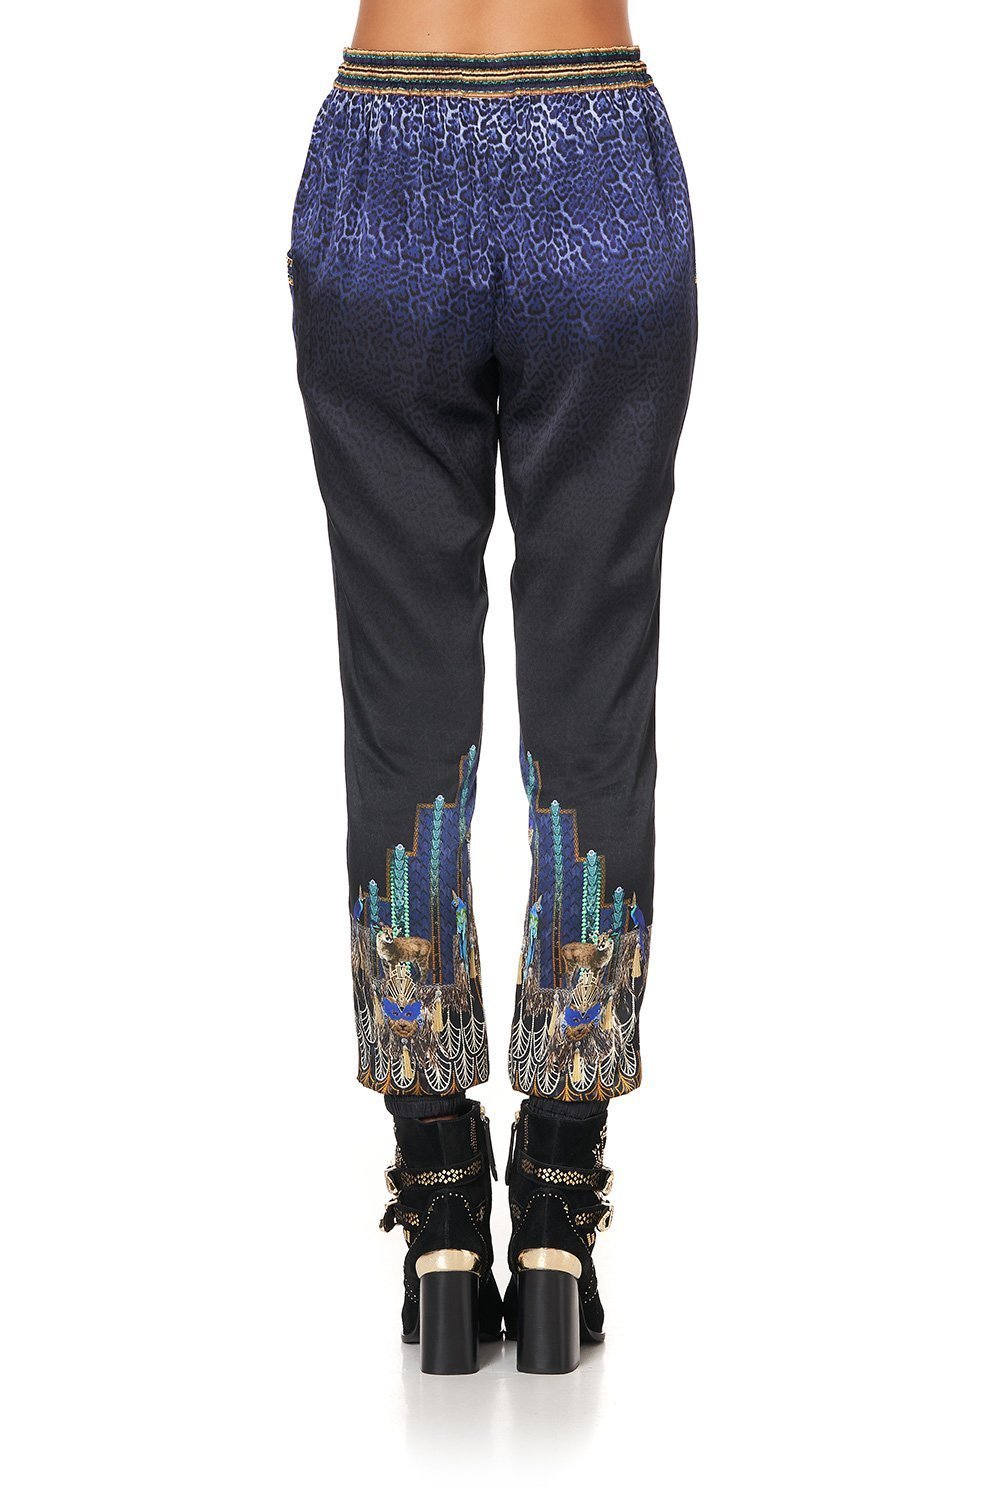 DRAWSTRING PANT WITH CUFFS DRIPPING IN DECO